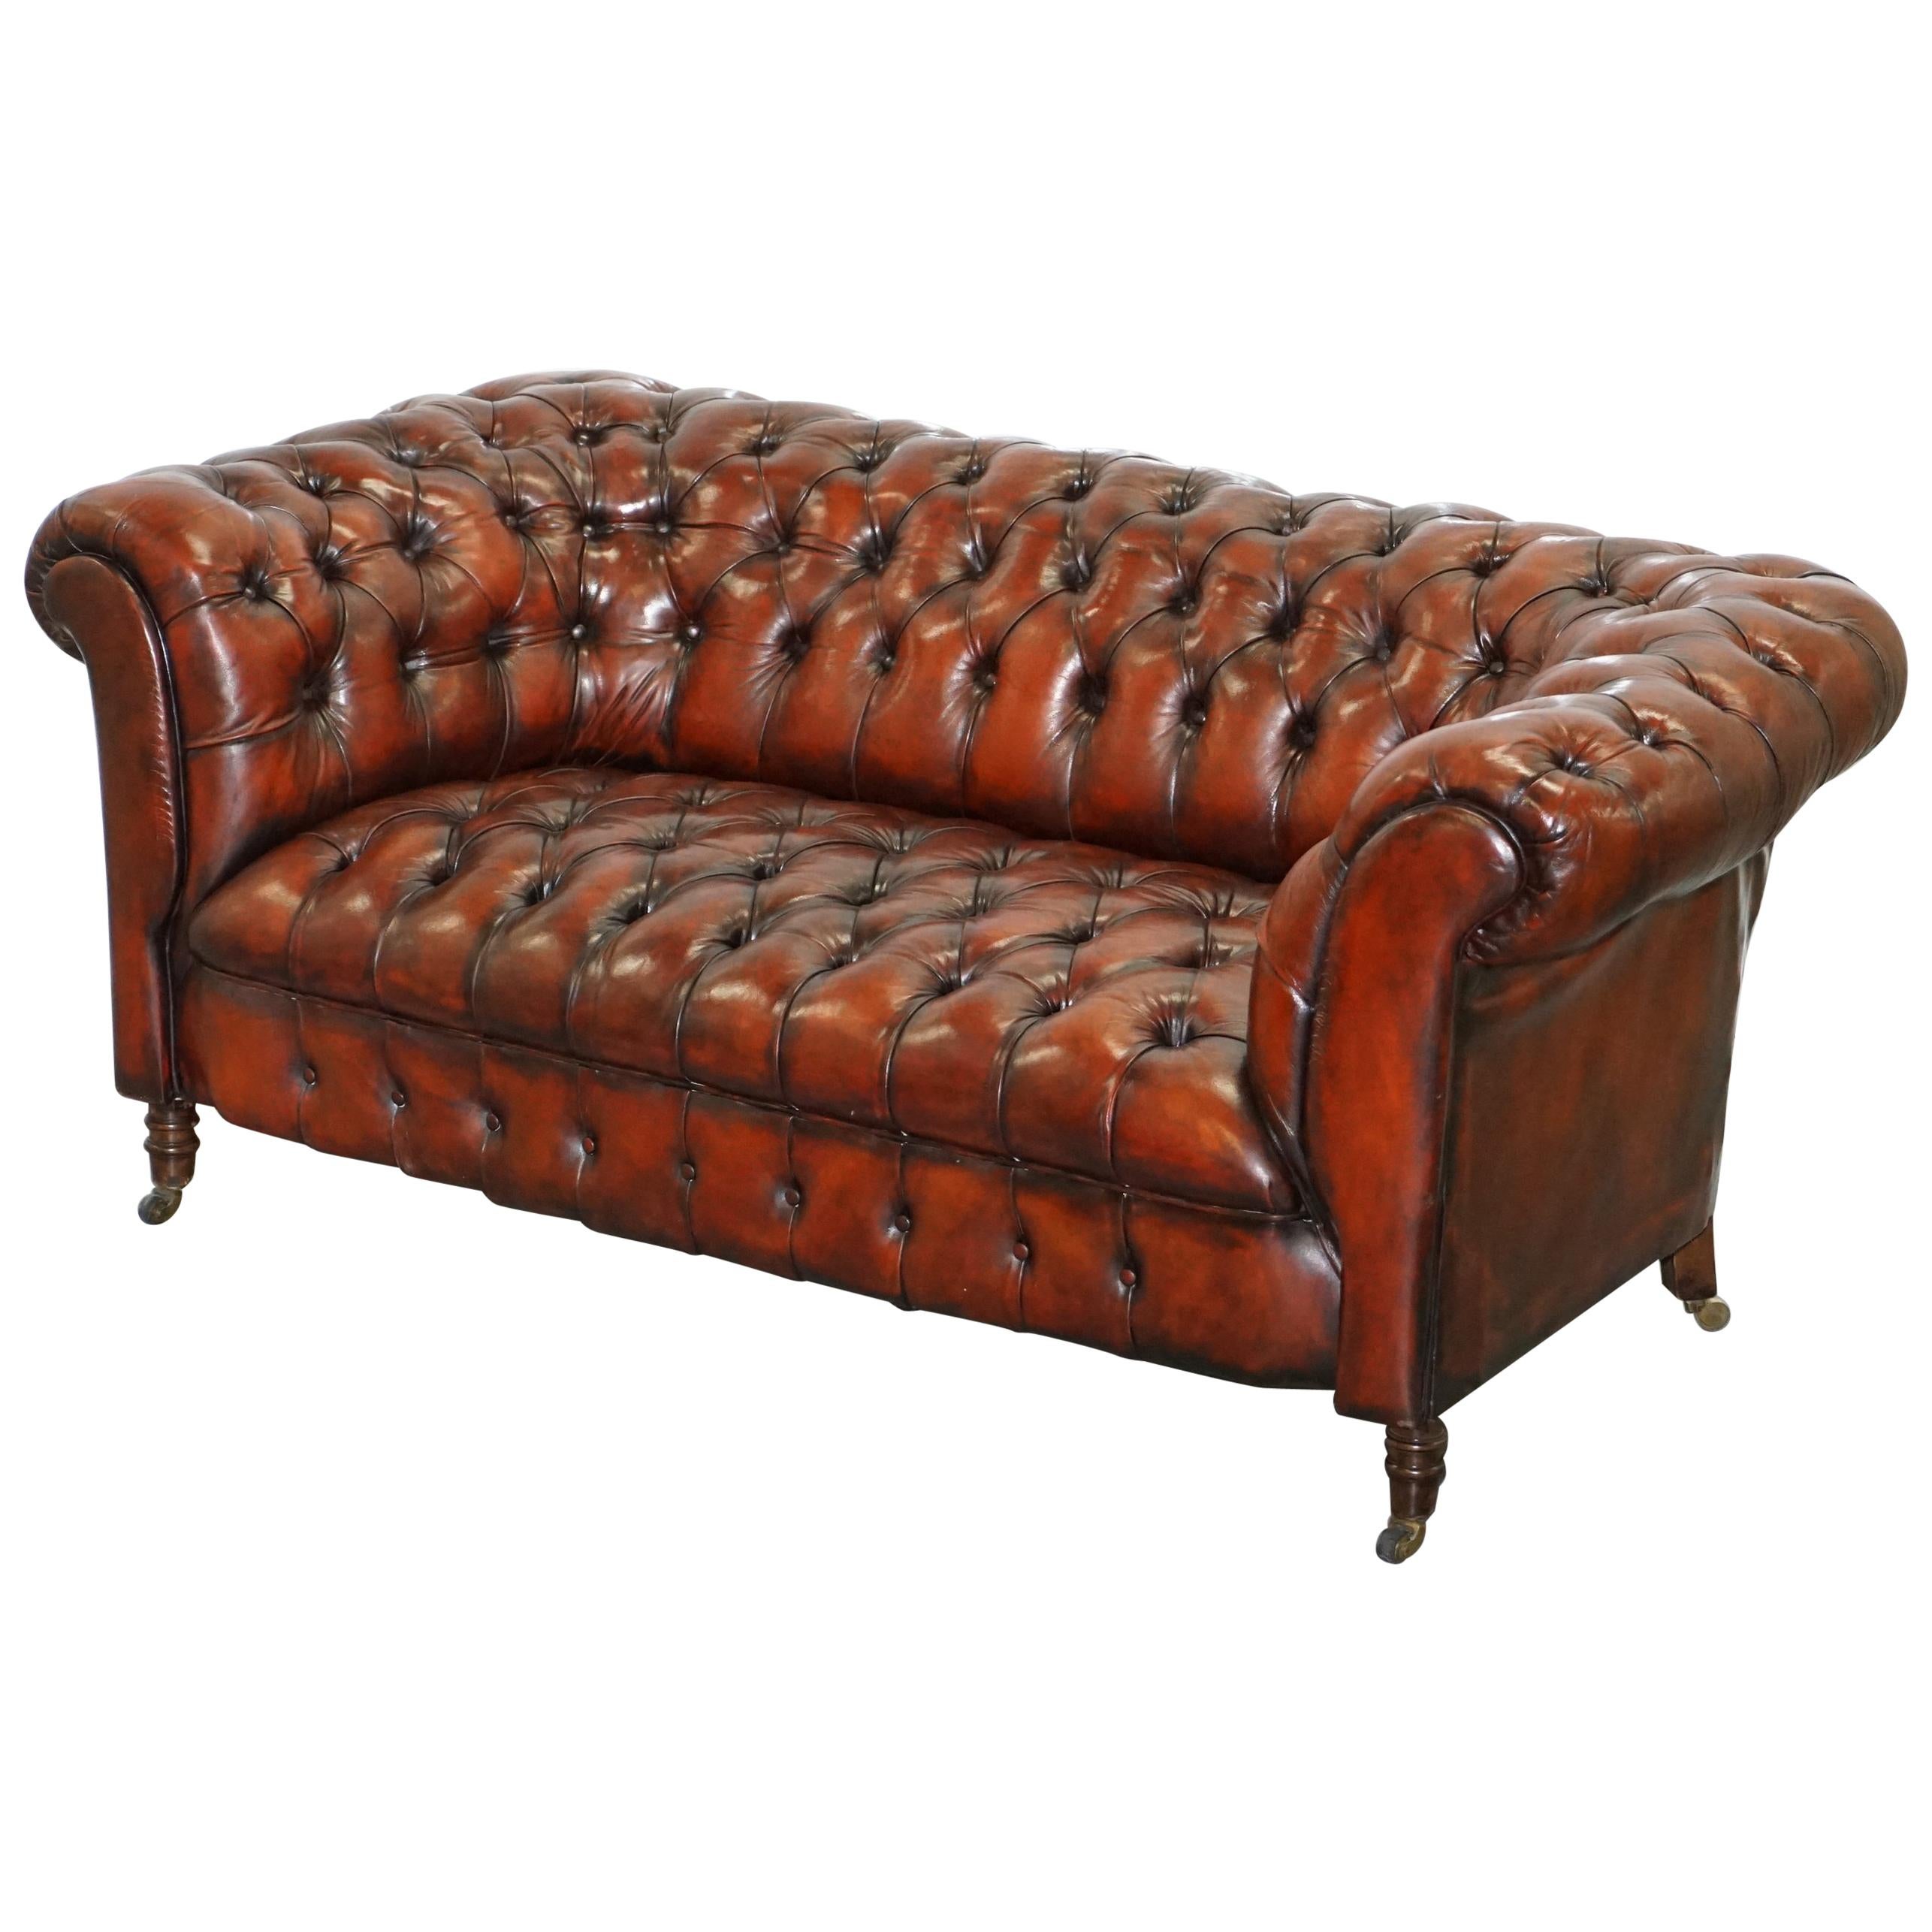 Small Restored Chesterfield Victorian Whisky Brown Leather Sofa